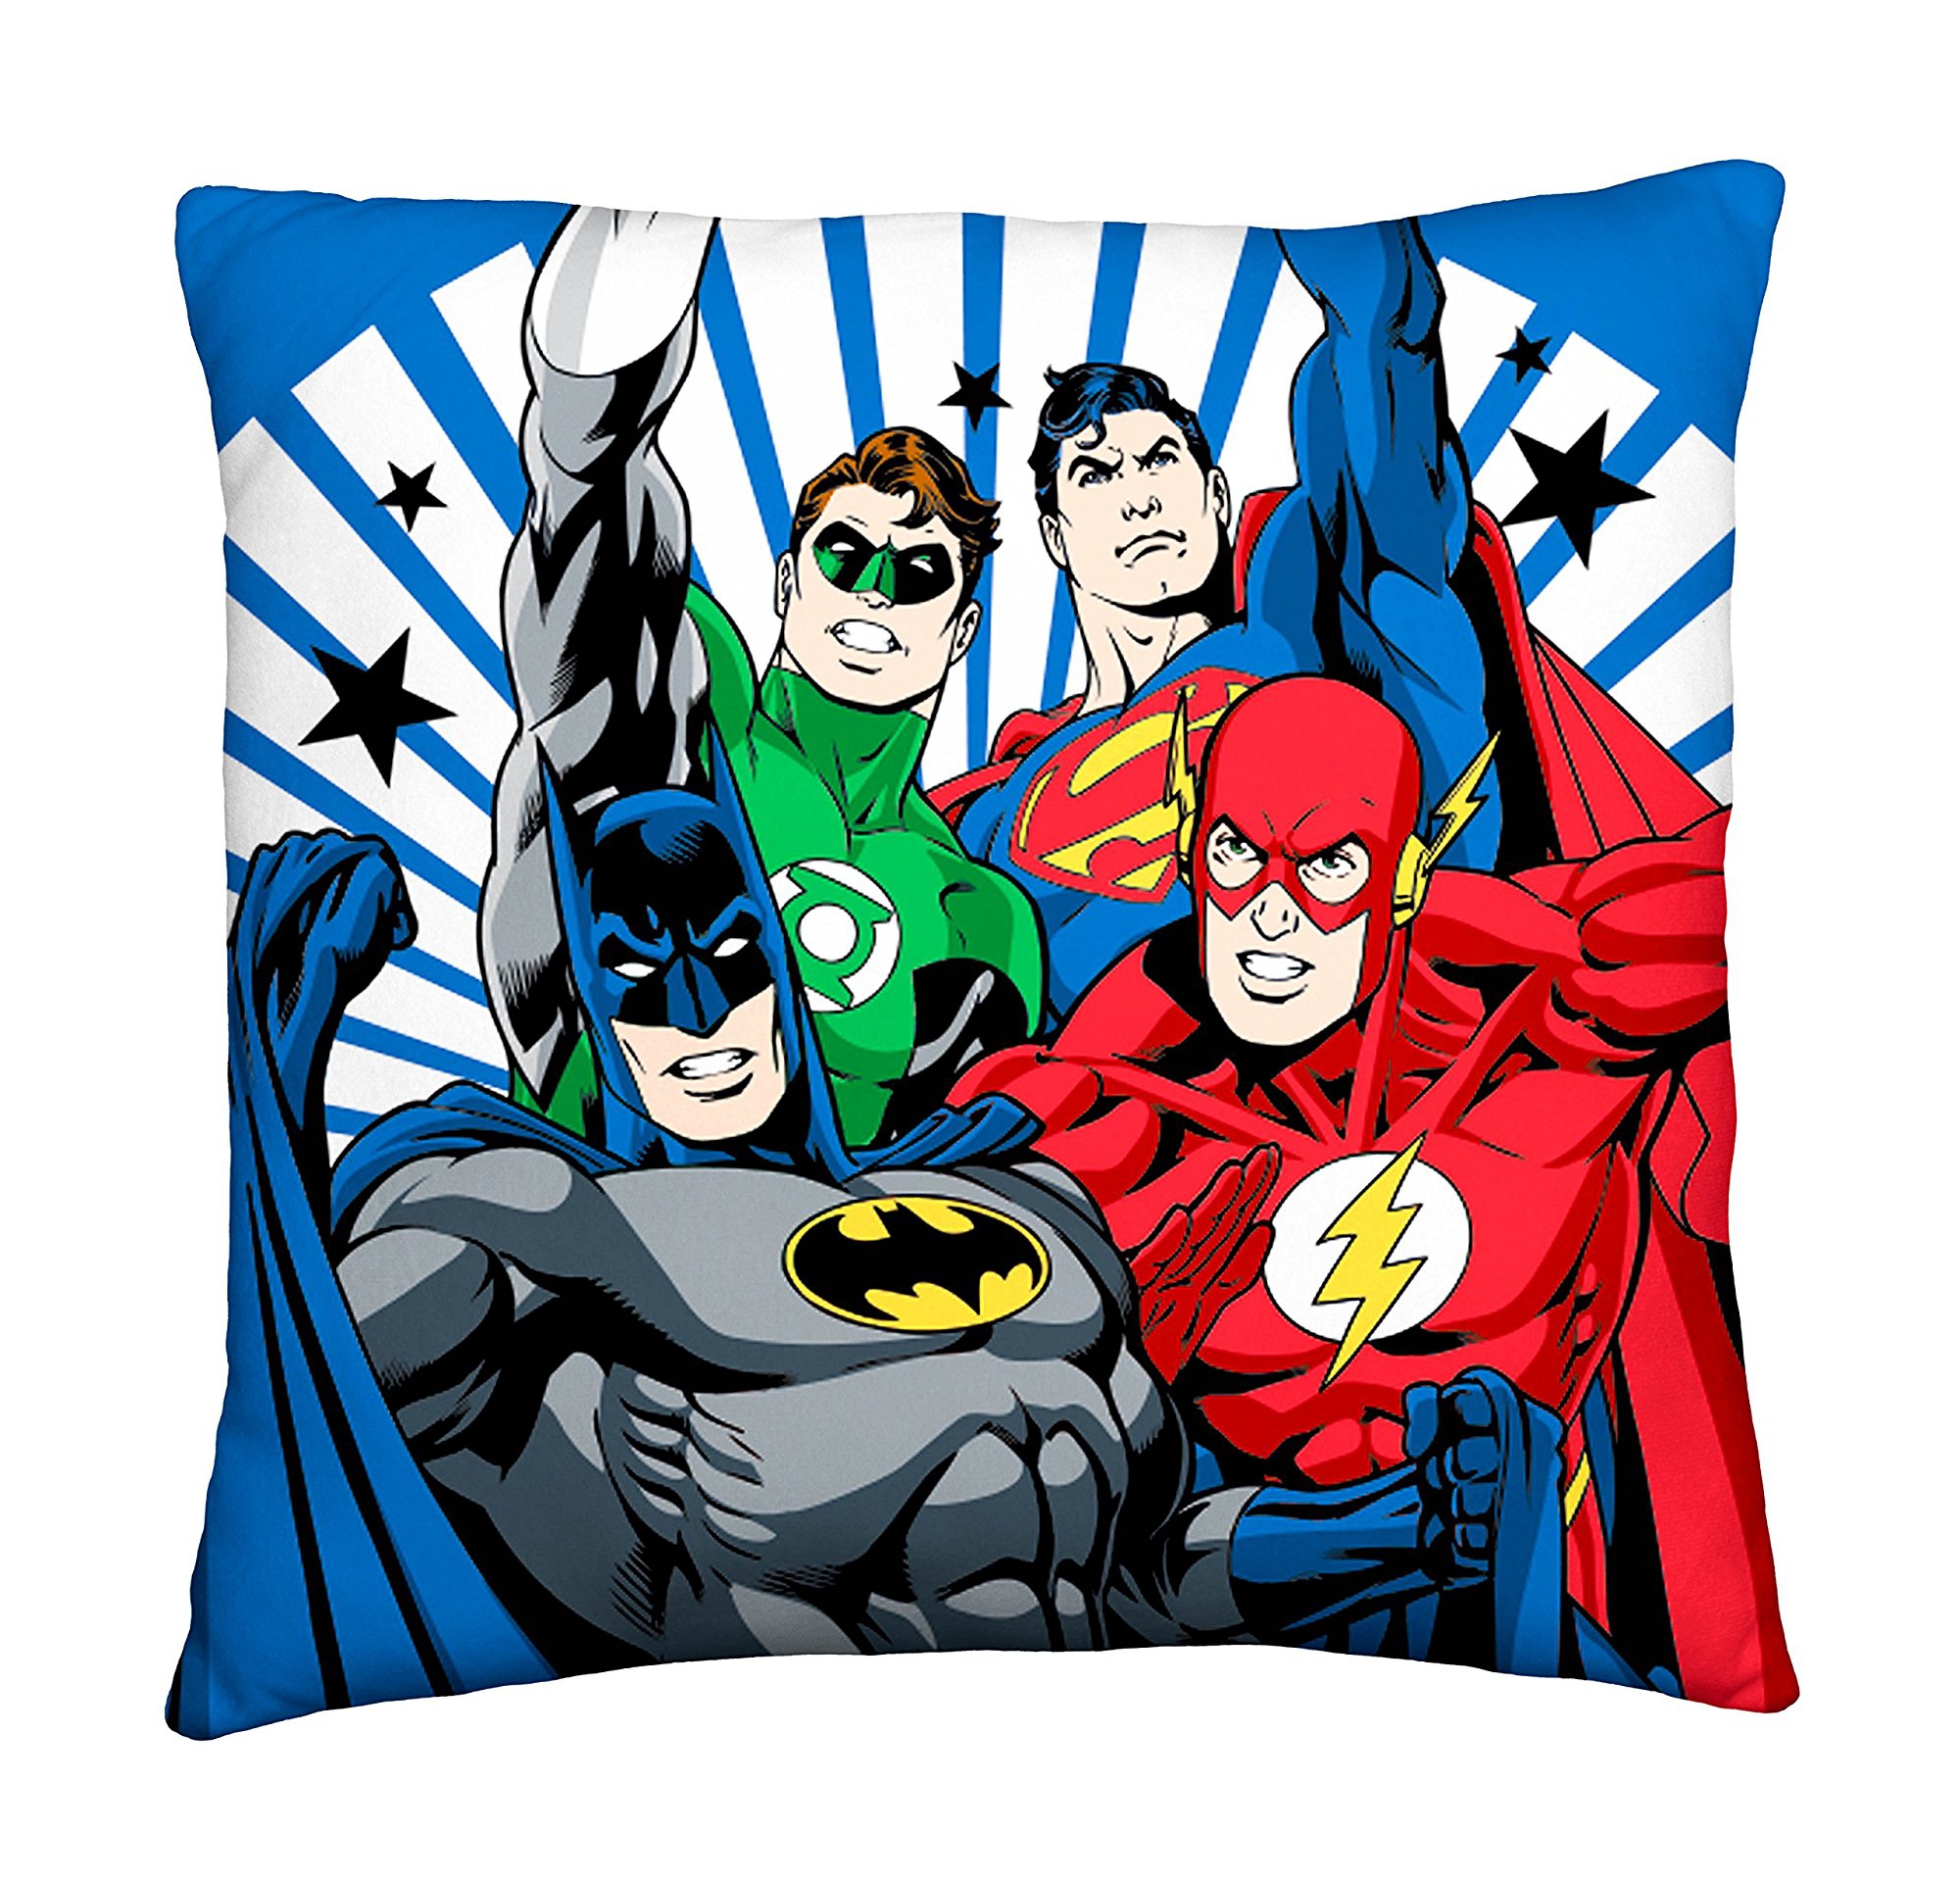 Justice League 'Inception' Printed Cushion